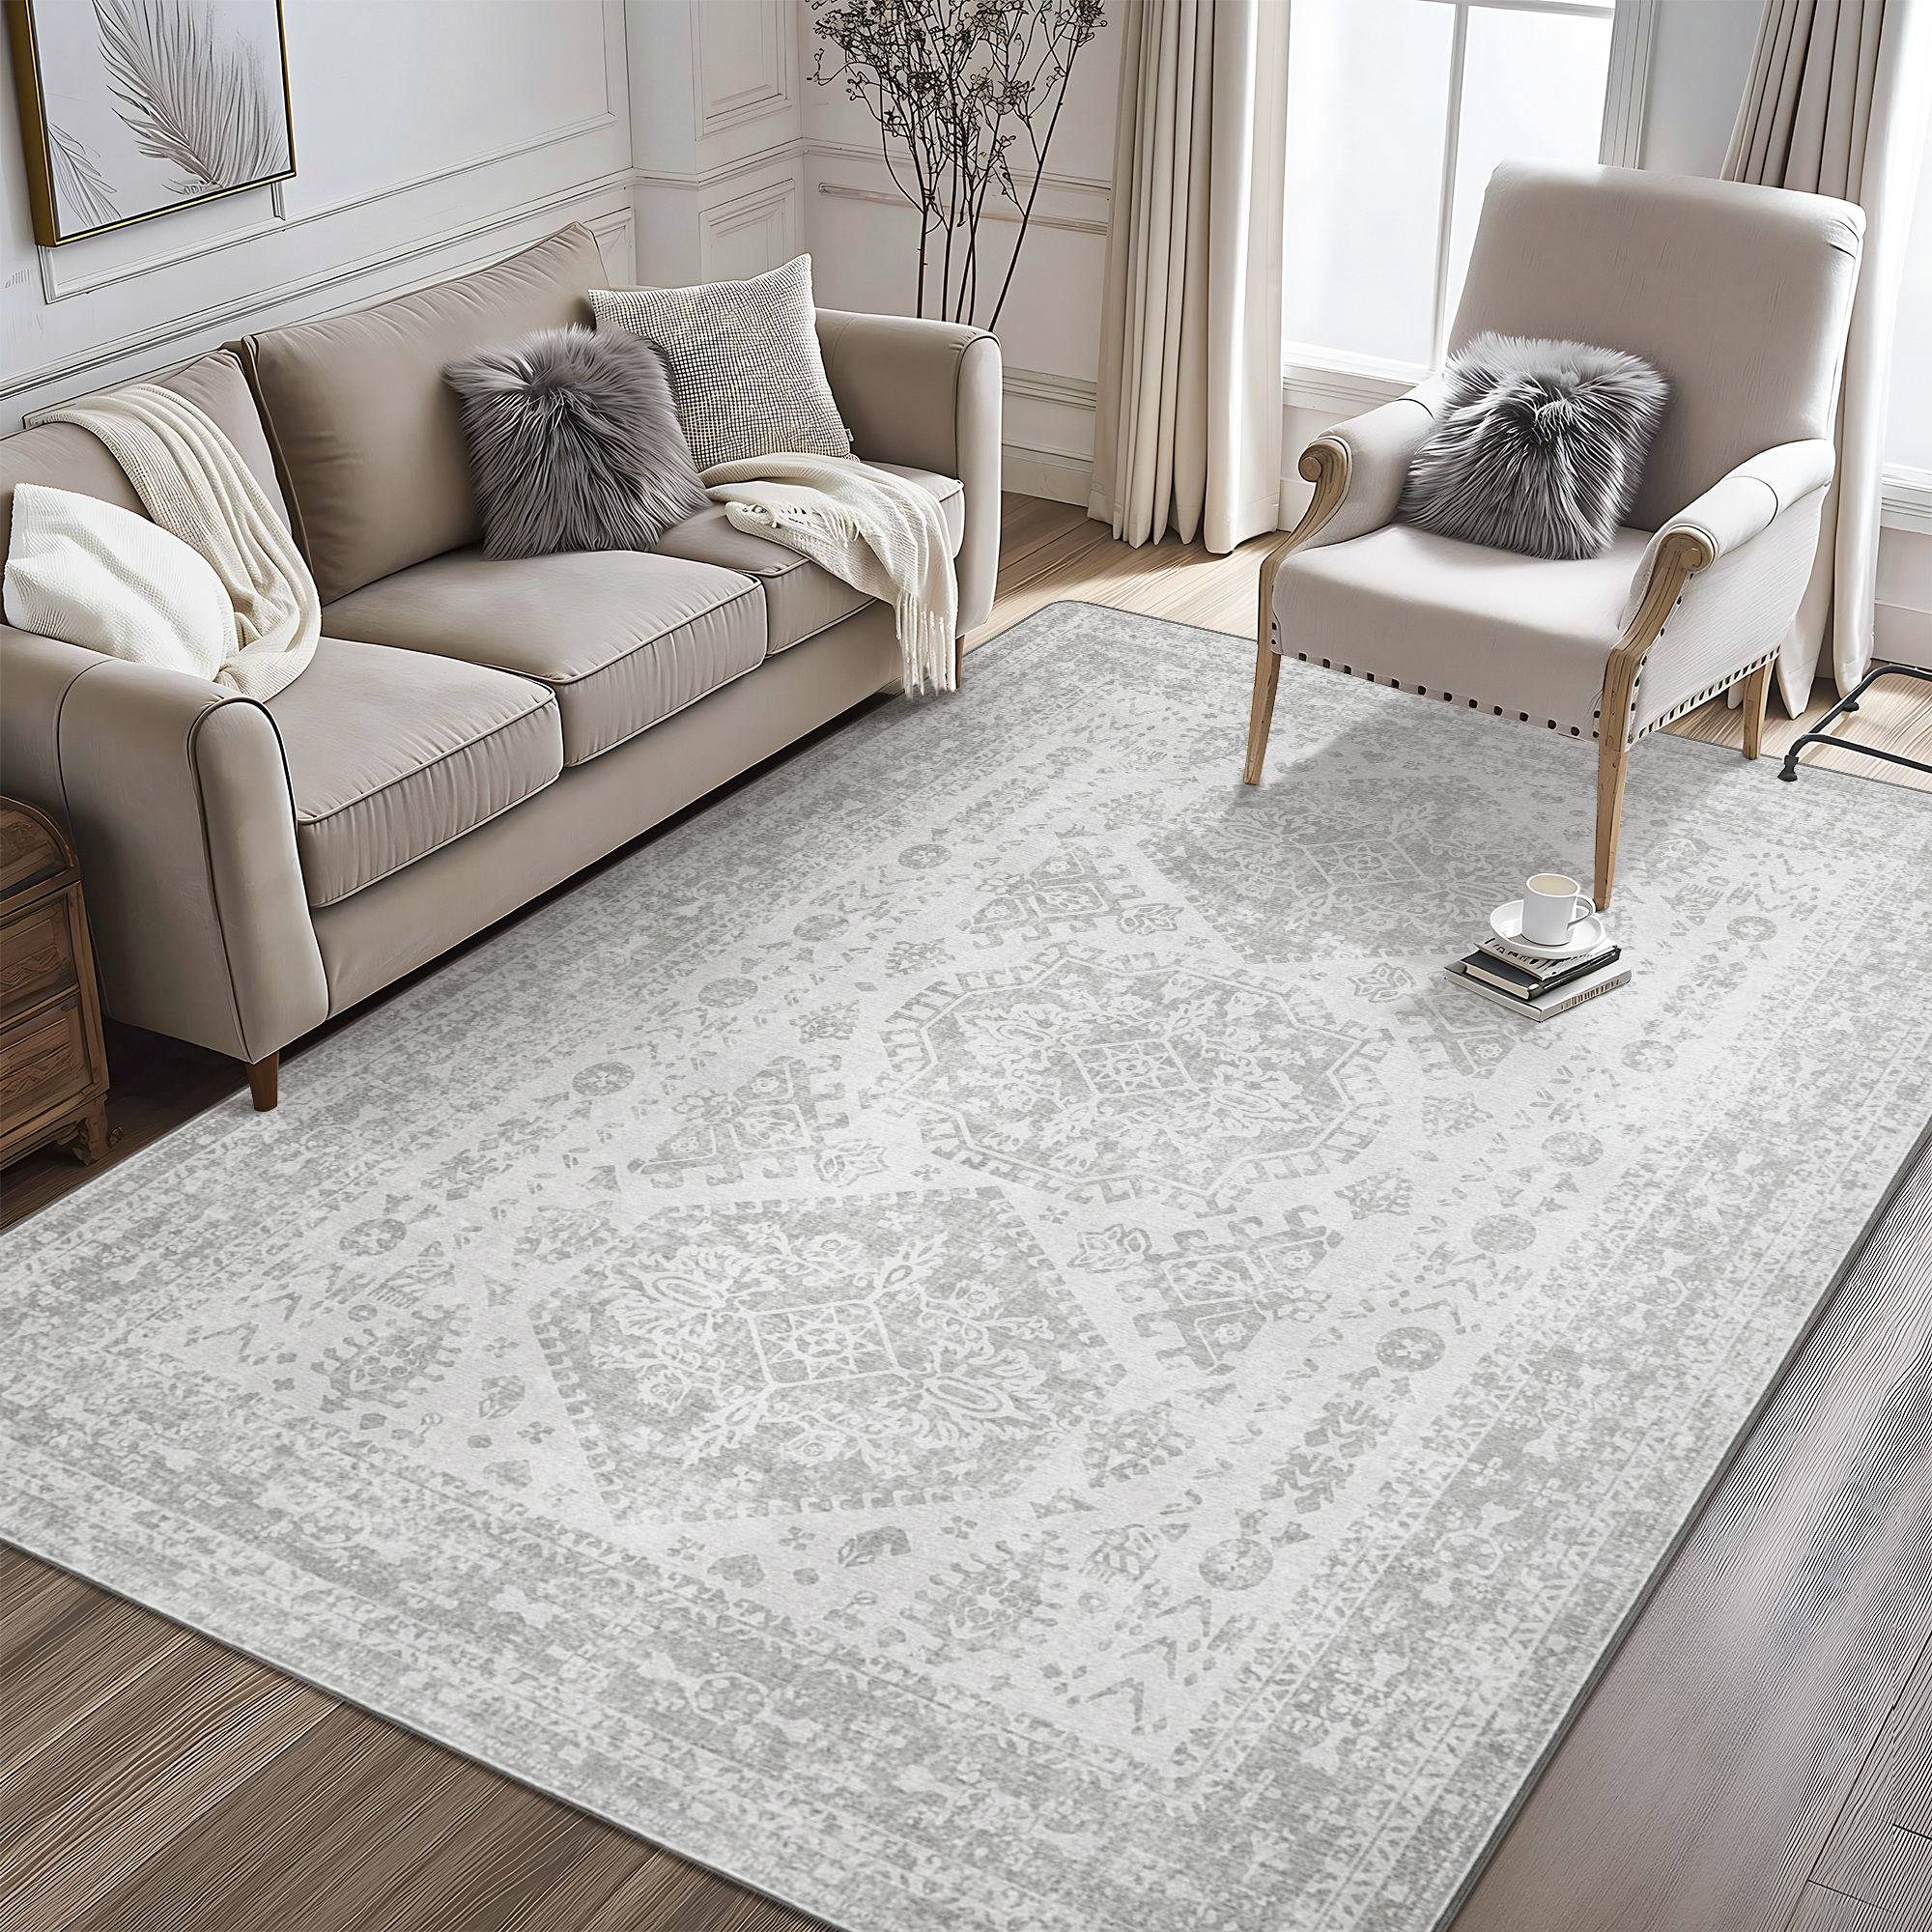 KUETH Area Rugs for Living Room 3x5 Machine Washable Bedroom Rugs Distressed Vintage Print Gray Large Throw Rug Dining Room Aesthetic, Non Slip Carpet with Gripper - image 2 of 7